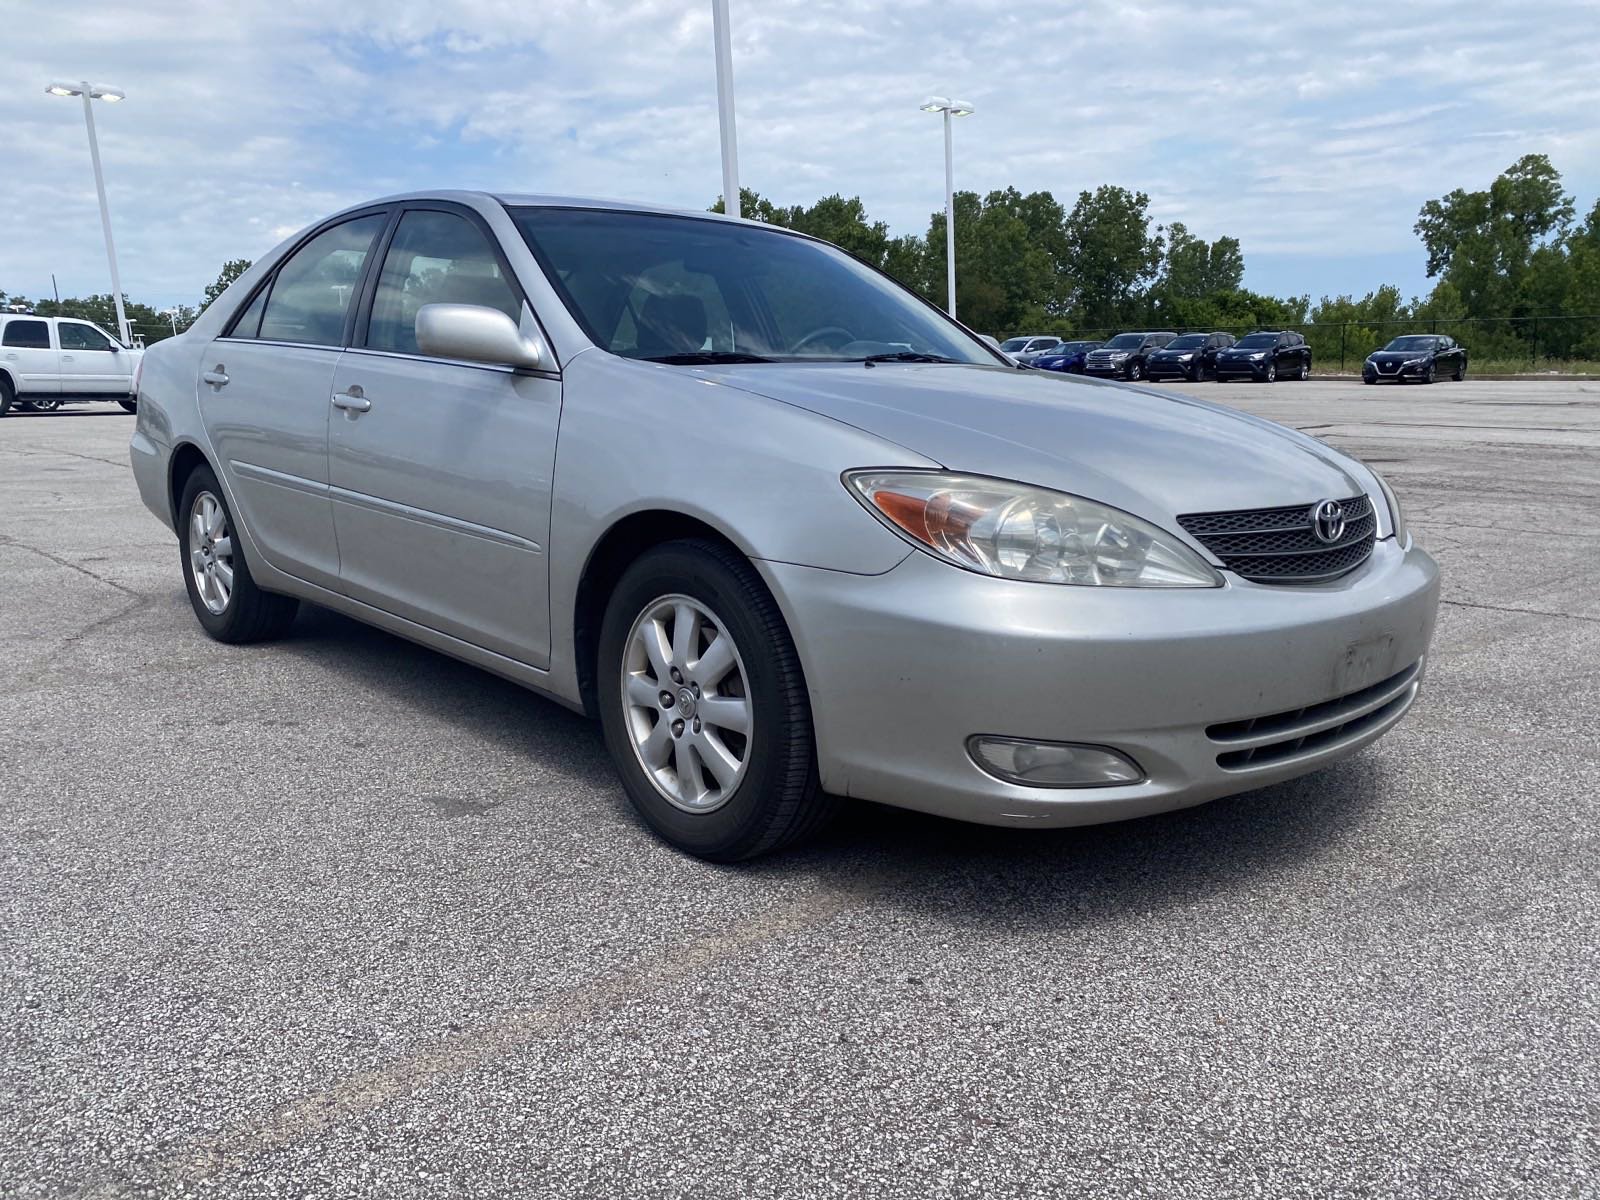 Pre-Owned 2004 Toyota Camry XLE 4dr Car in St. Peters #T34973A | Pappas ...